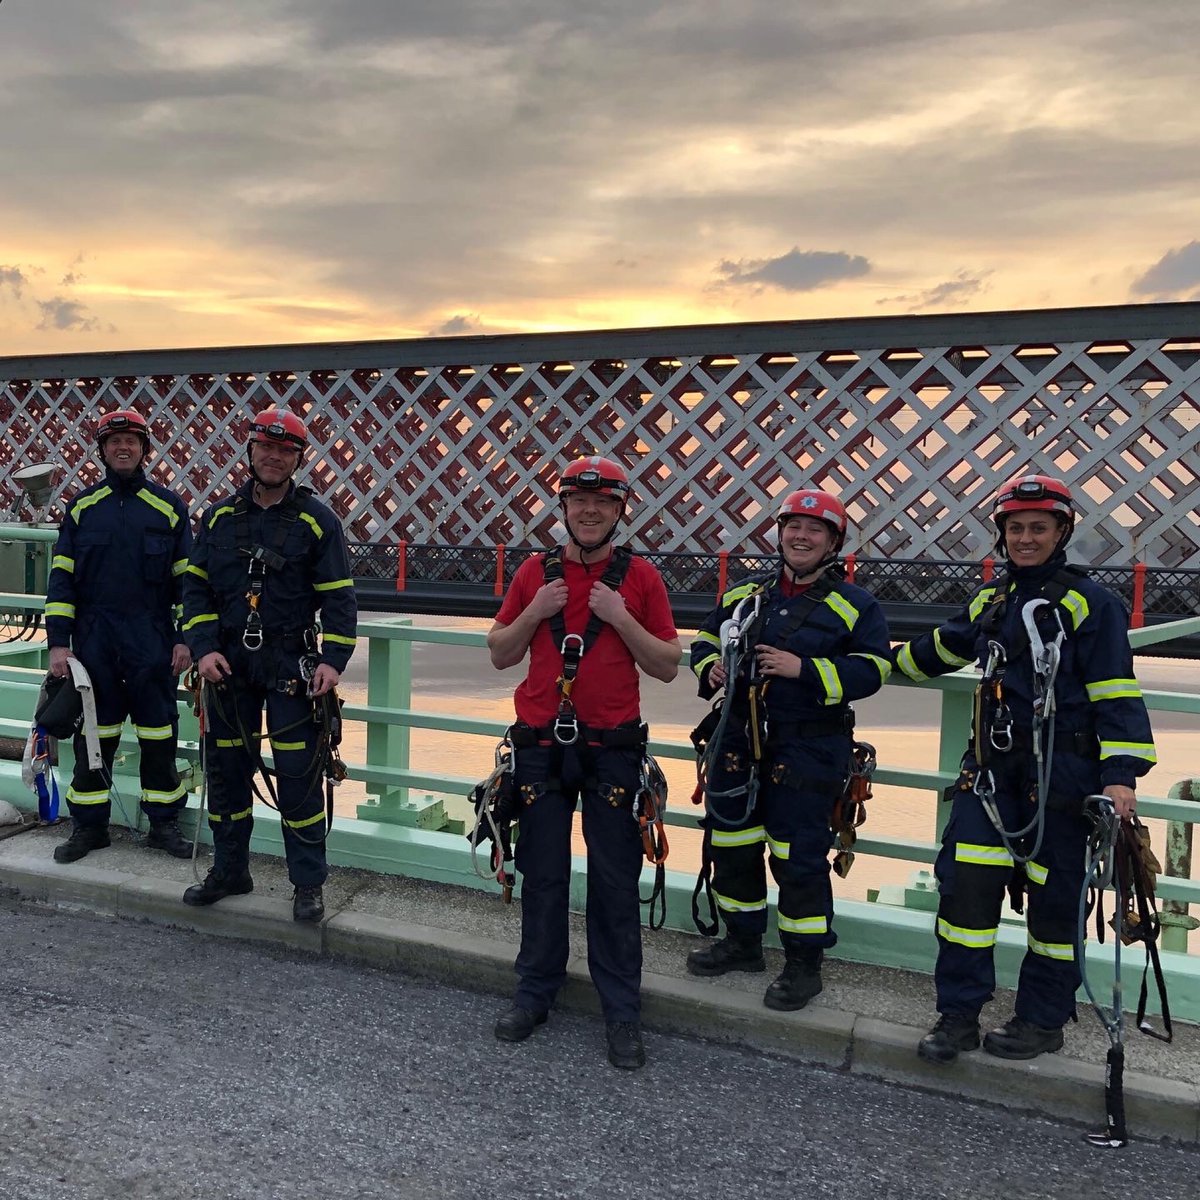 Lymms rope rescue unit assisted fire crews and police yesterday in rescuing a person from height on the jubilee bridge in Runcorn. #teamwork #jointworking #999family #roperescue #technicalrescue #hereforyou #firefighters